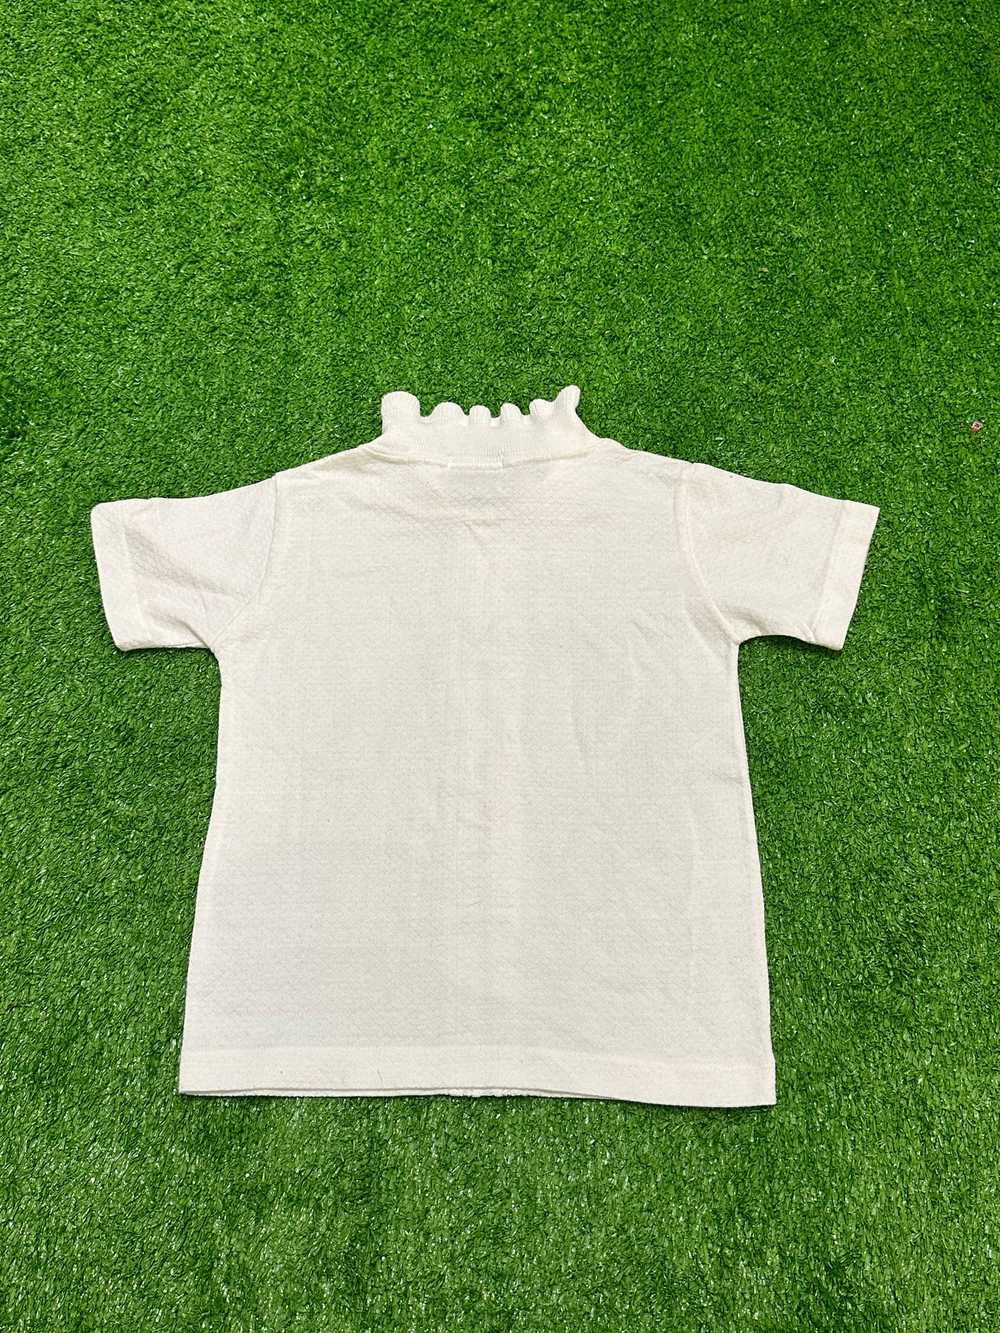 Health-Tex Stantogs Lace Tee Youth Size 6x (6.5) - image 4